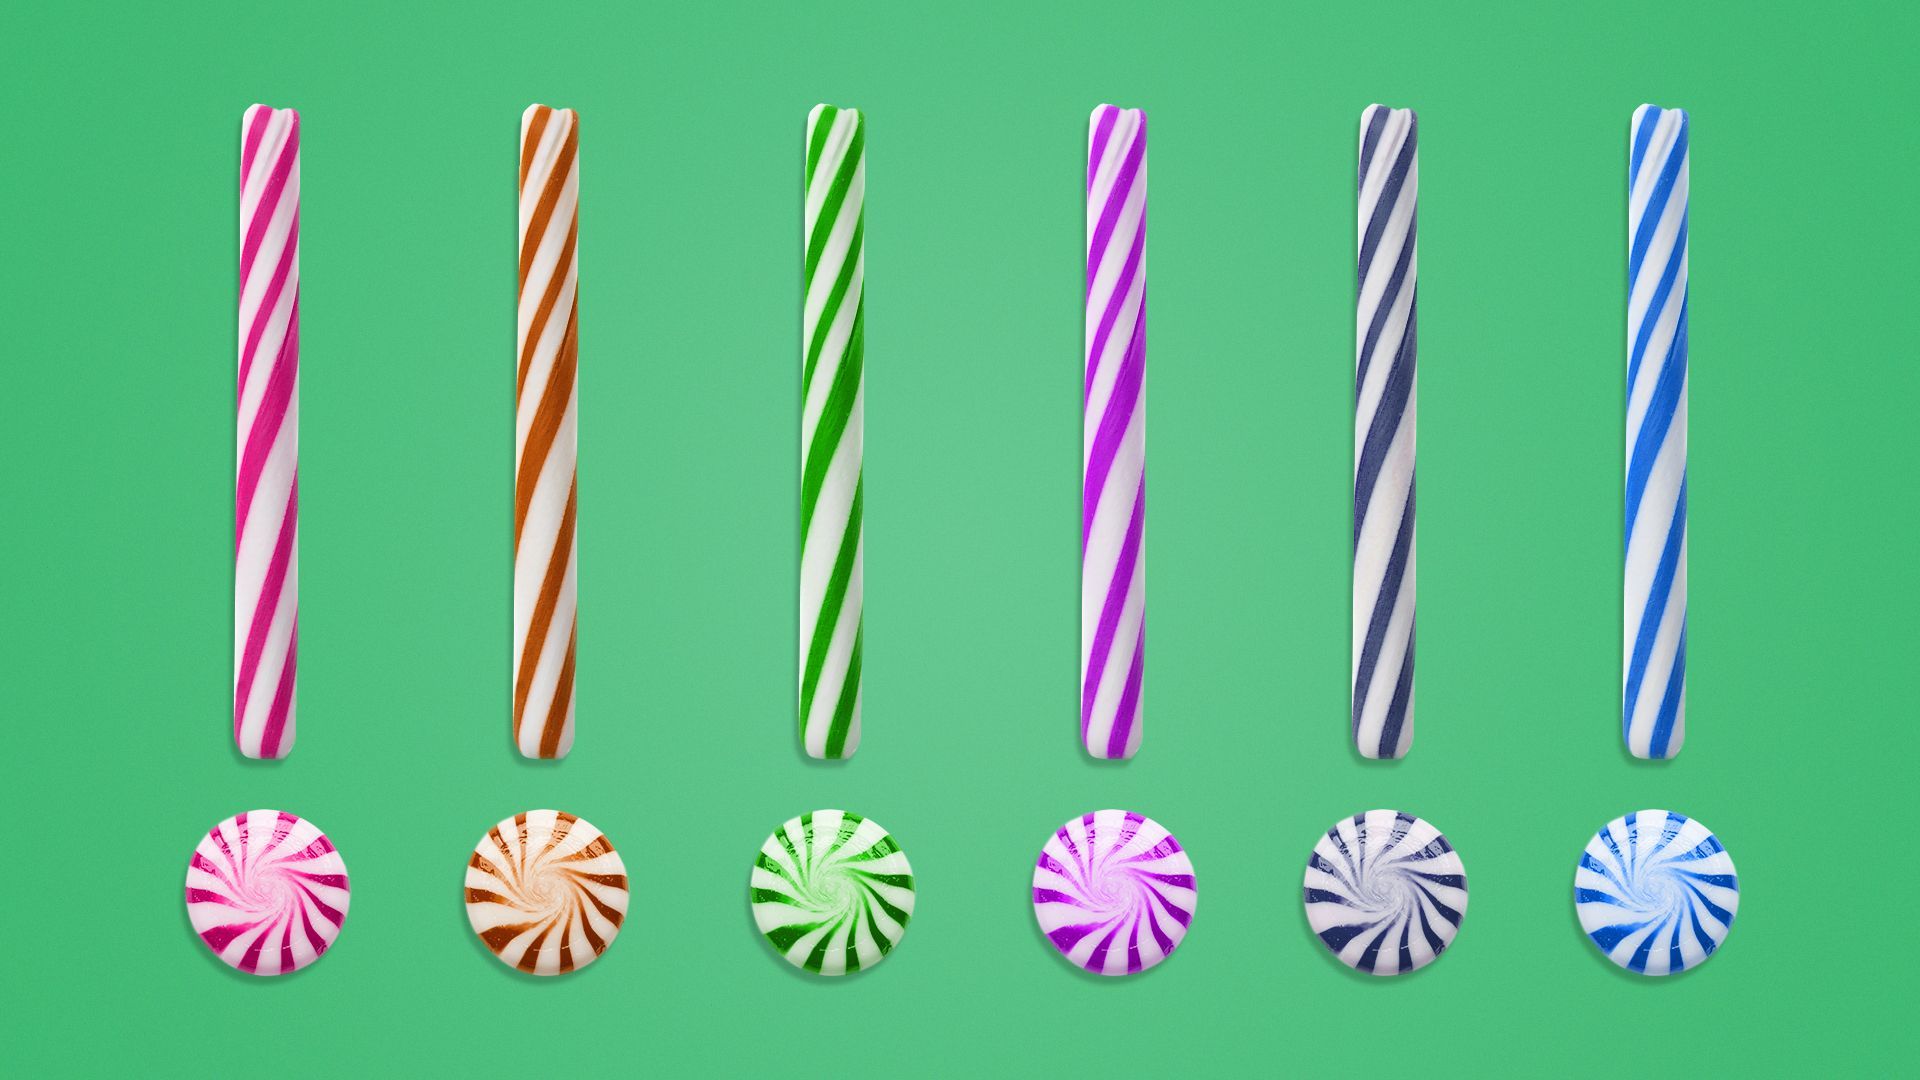 an illustration of candy canes and peppermint rounds in varying colors forming exclamation points